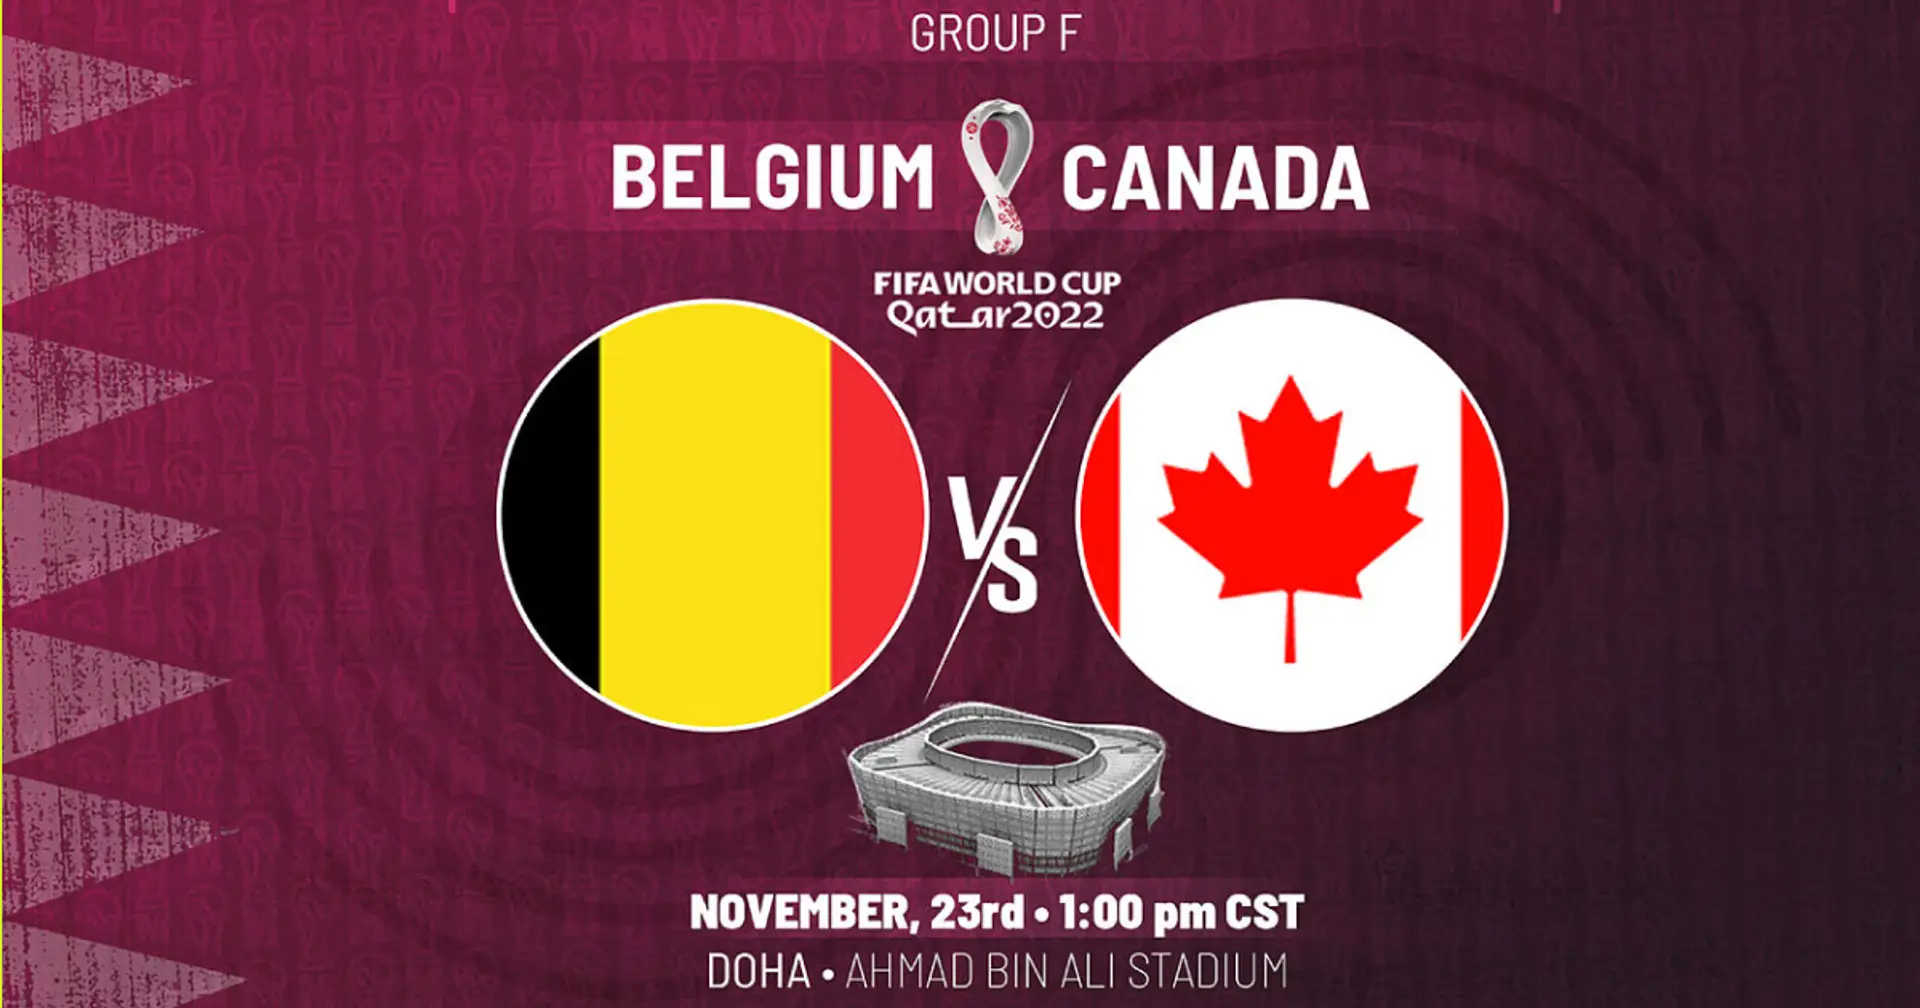 Belgium vs Canada: Official team lineups for the World Cup clash revealed